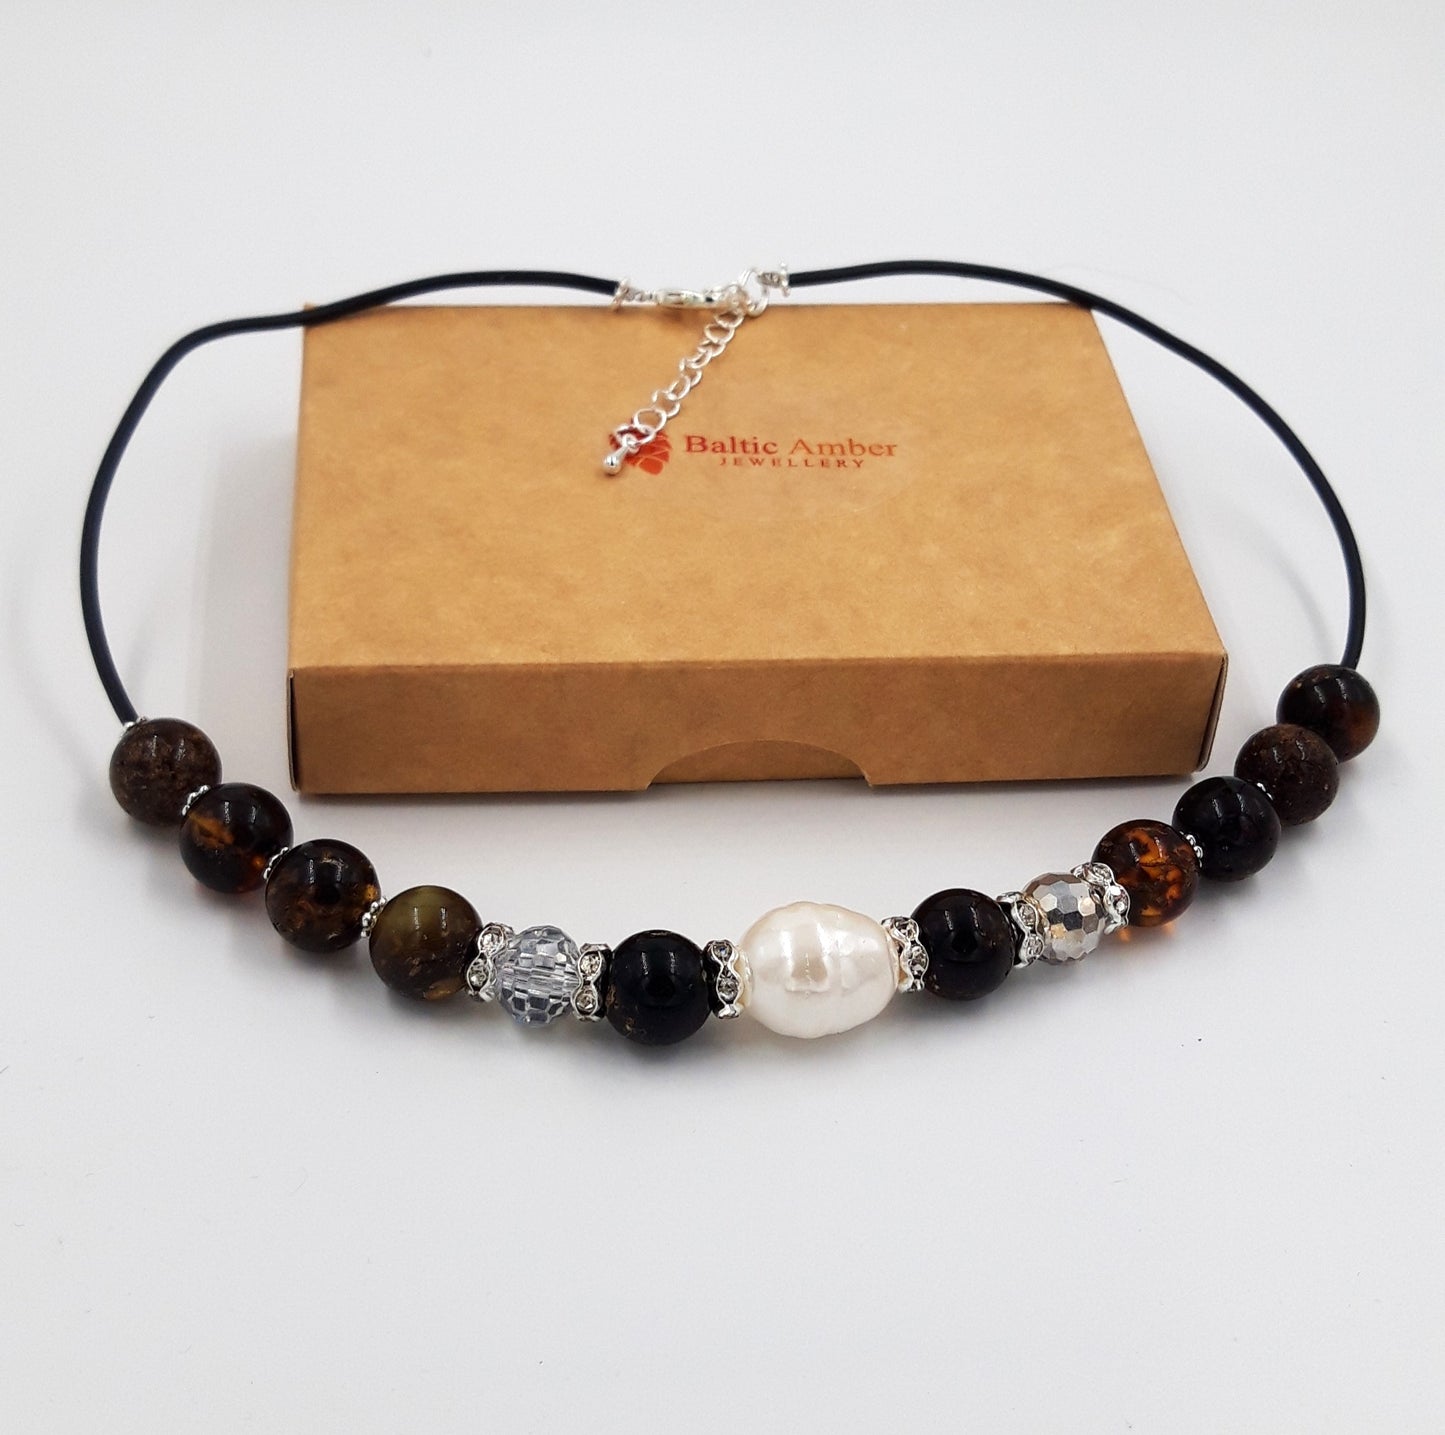 Baltic amber necklace for adults with freshwater pearl and crystal